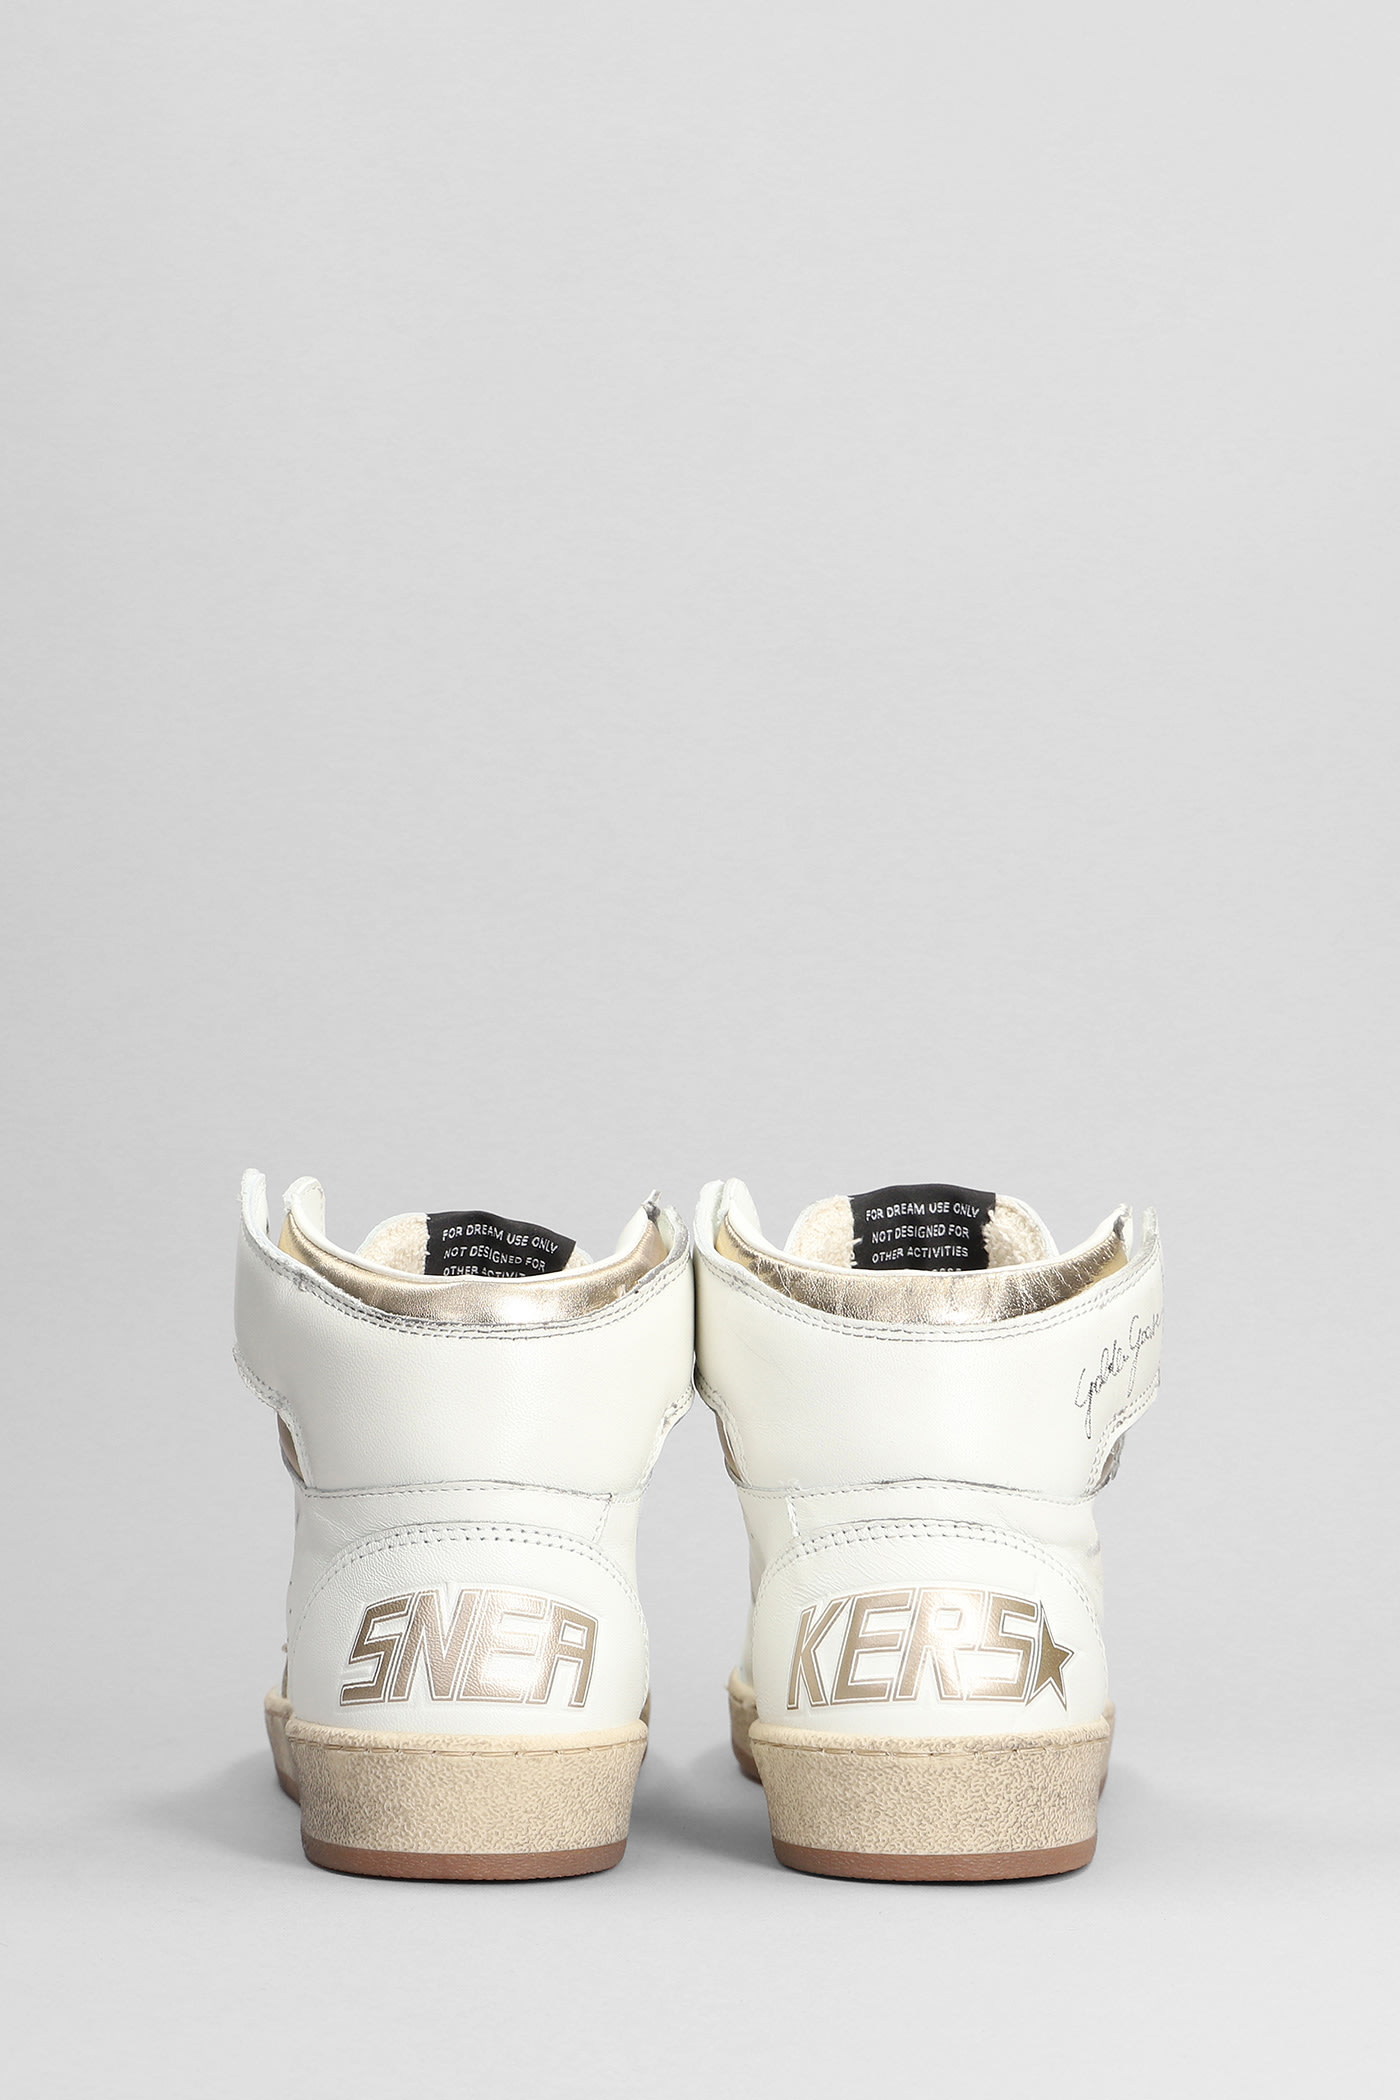 Shop Golden Goose Sky Star Sneakers In White Leather